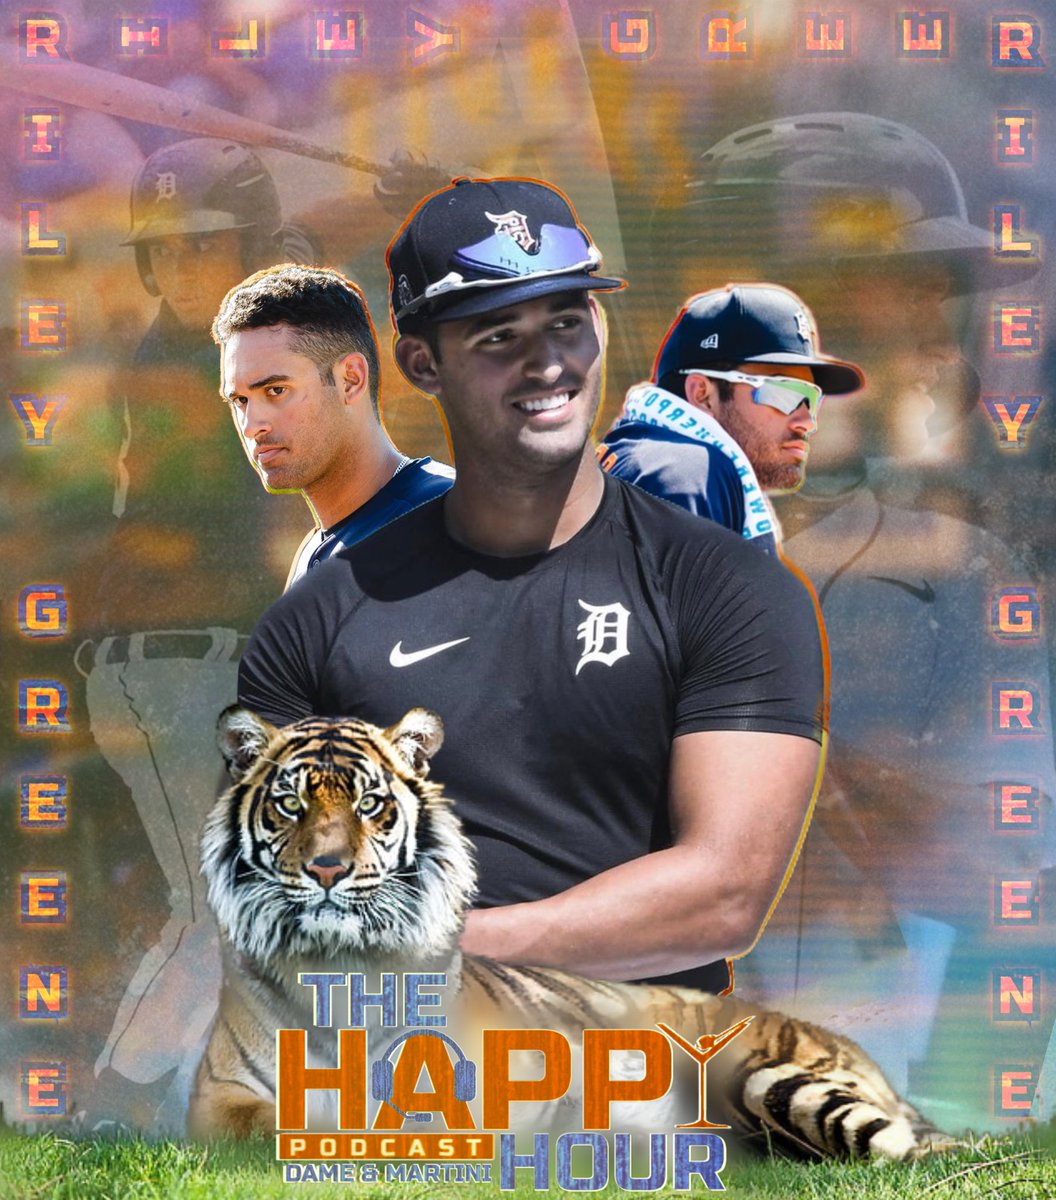 one of the most requested guests has got himself an official date on @thehappyhrpod ! way too excited to talk to the No. 7 current ranked MLB Prospect, 5th Overall pick of the 2019 MLB Draft with the @tigers Organization, and good friend from back home @riley_greene. 🎙🍸